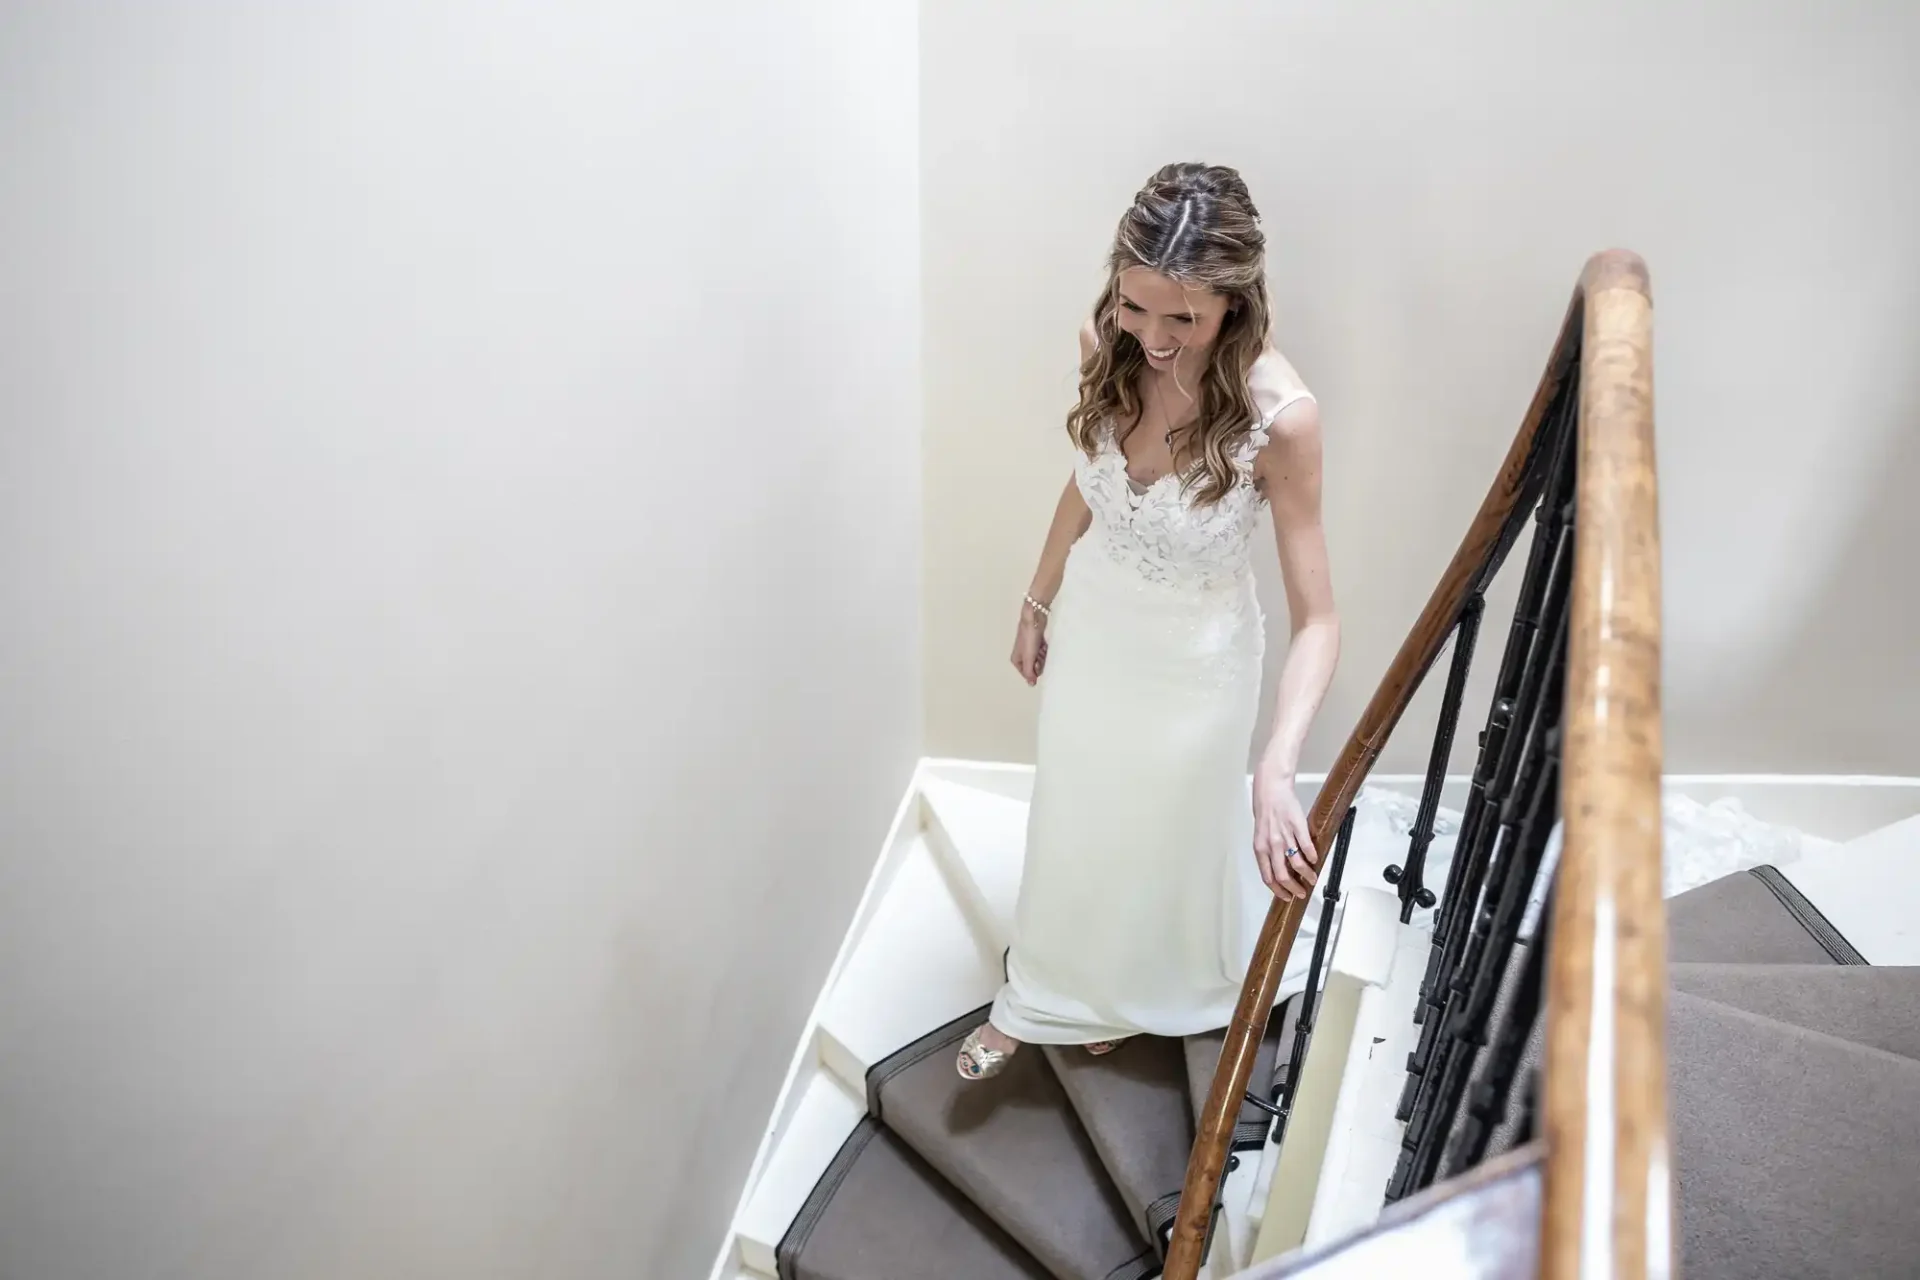 A woman in a white wedding dress ascends a staircase, holding the handrail and smiling.